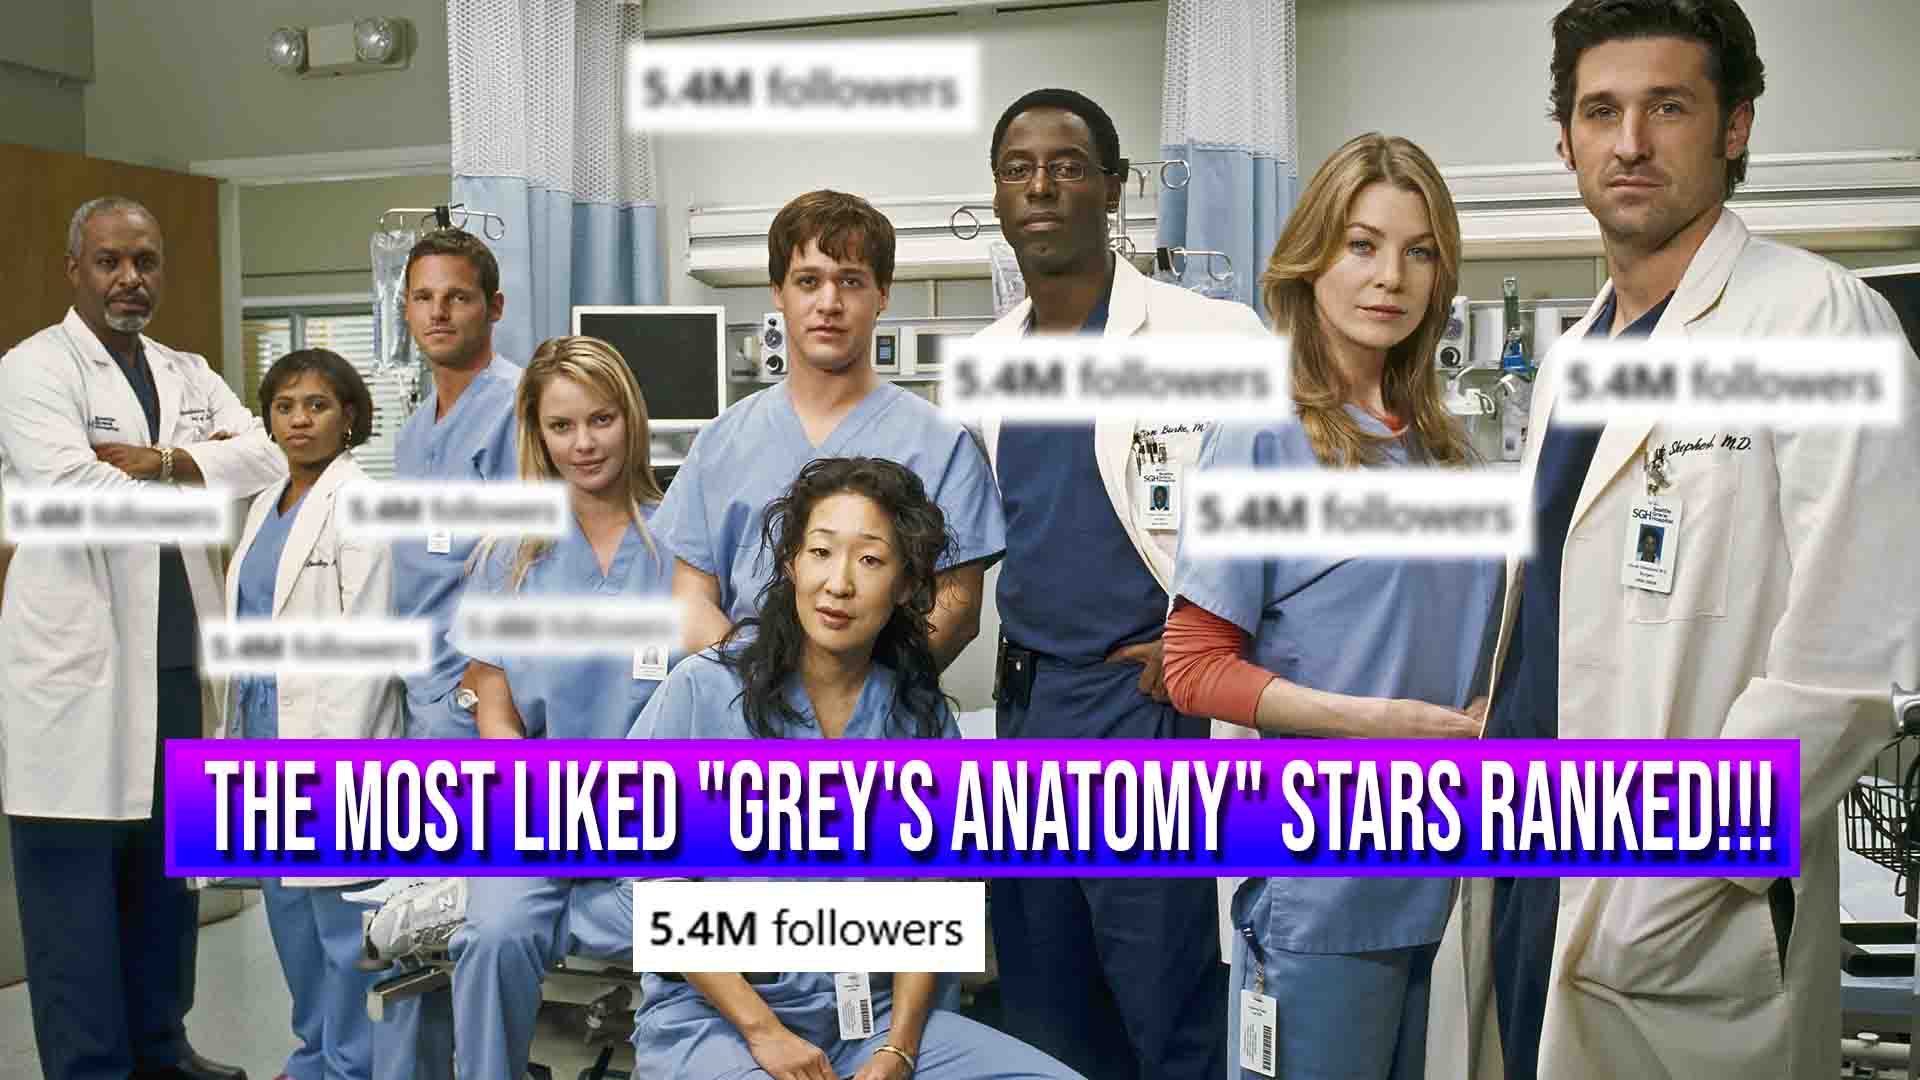 The Most Liked “Grey’s Anatomy” Stars Ranked From Lowest